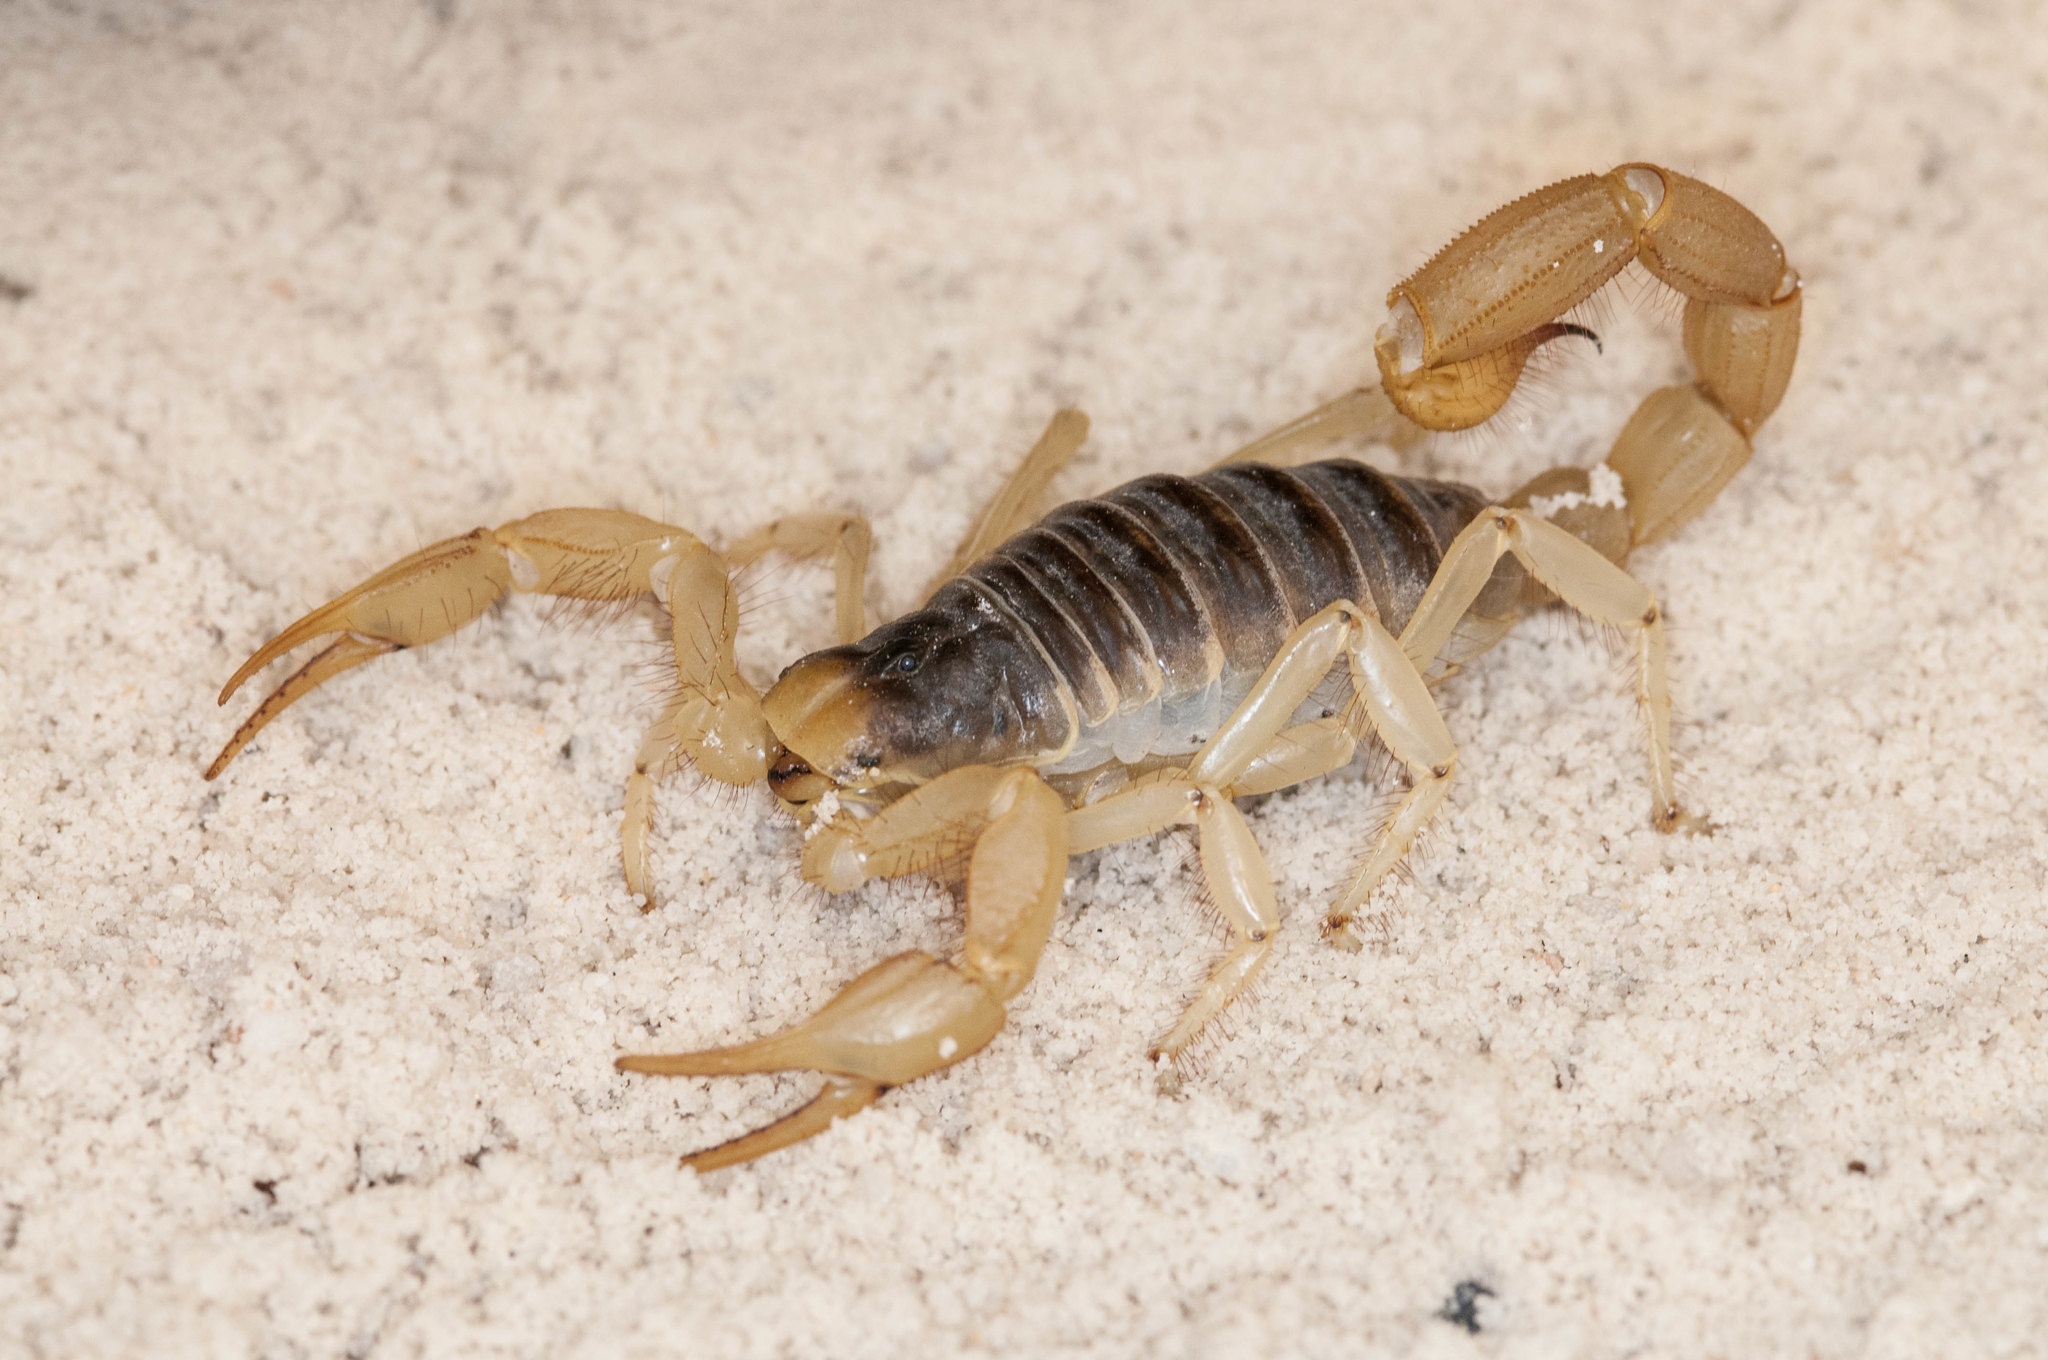 A photo of a buthid scorpion on sand